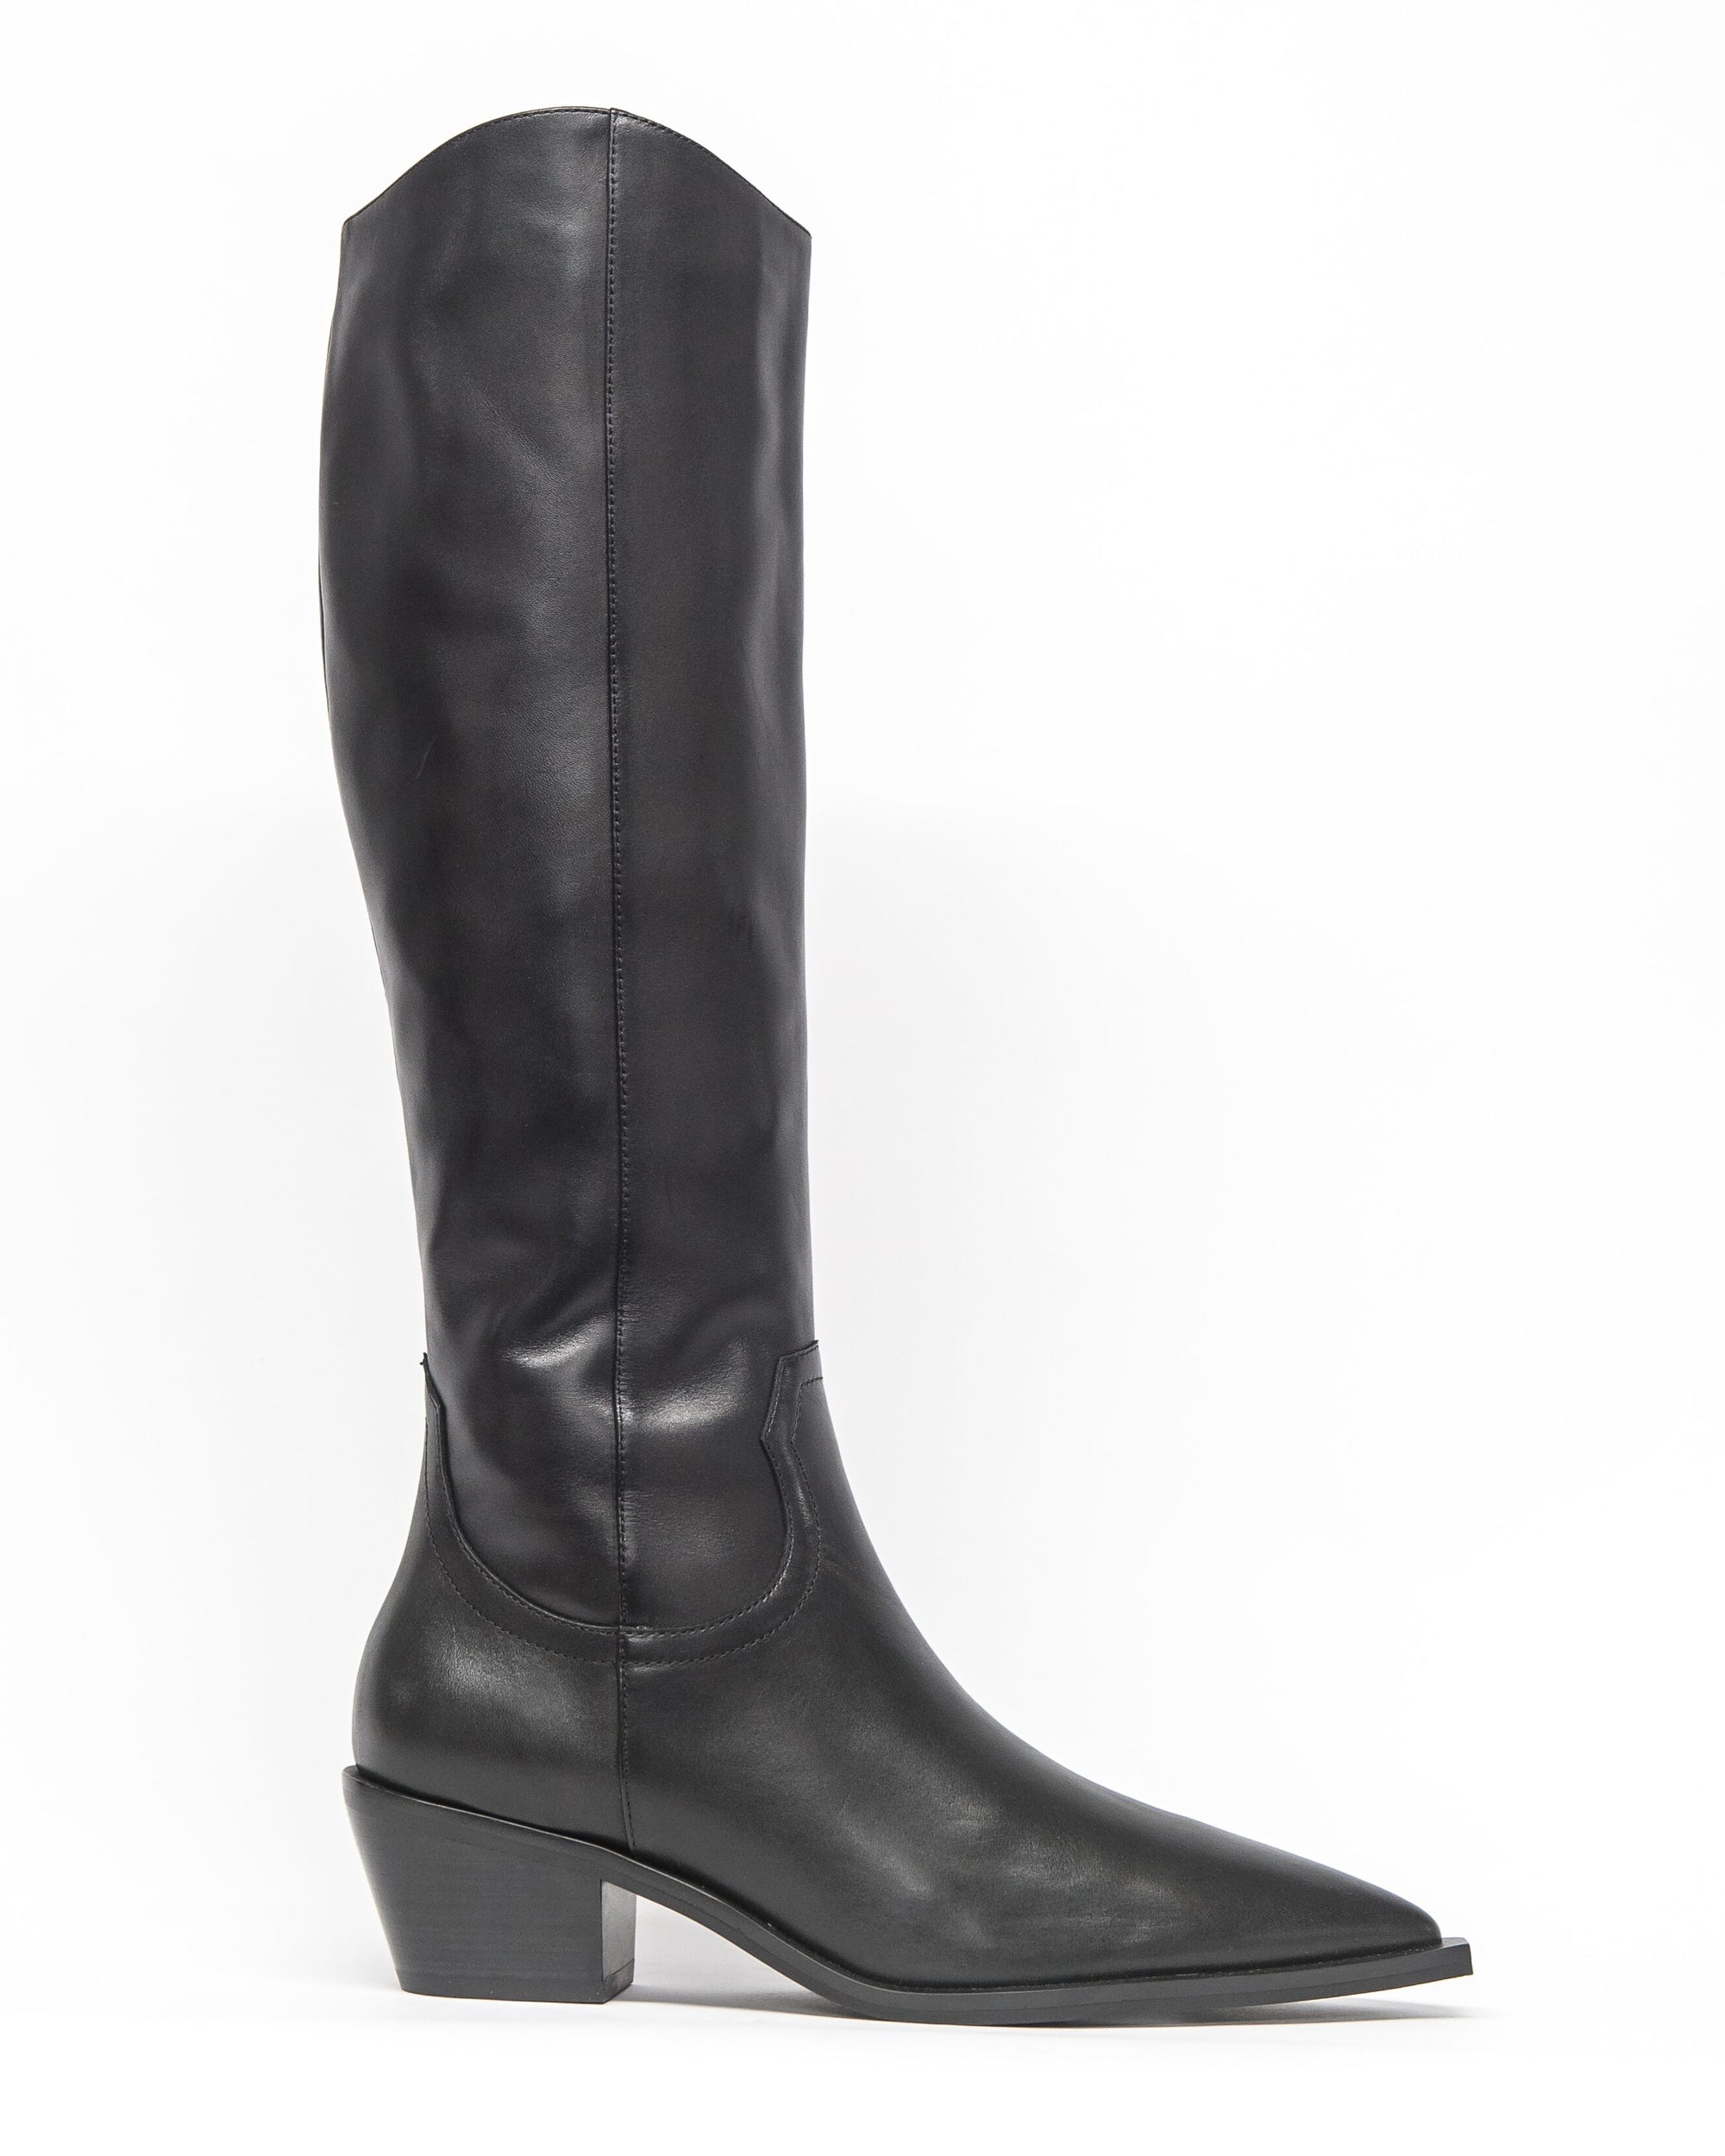 ratify boot - black leather